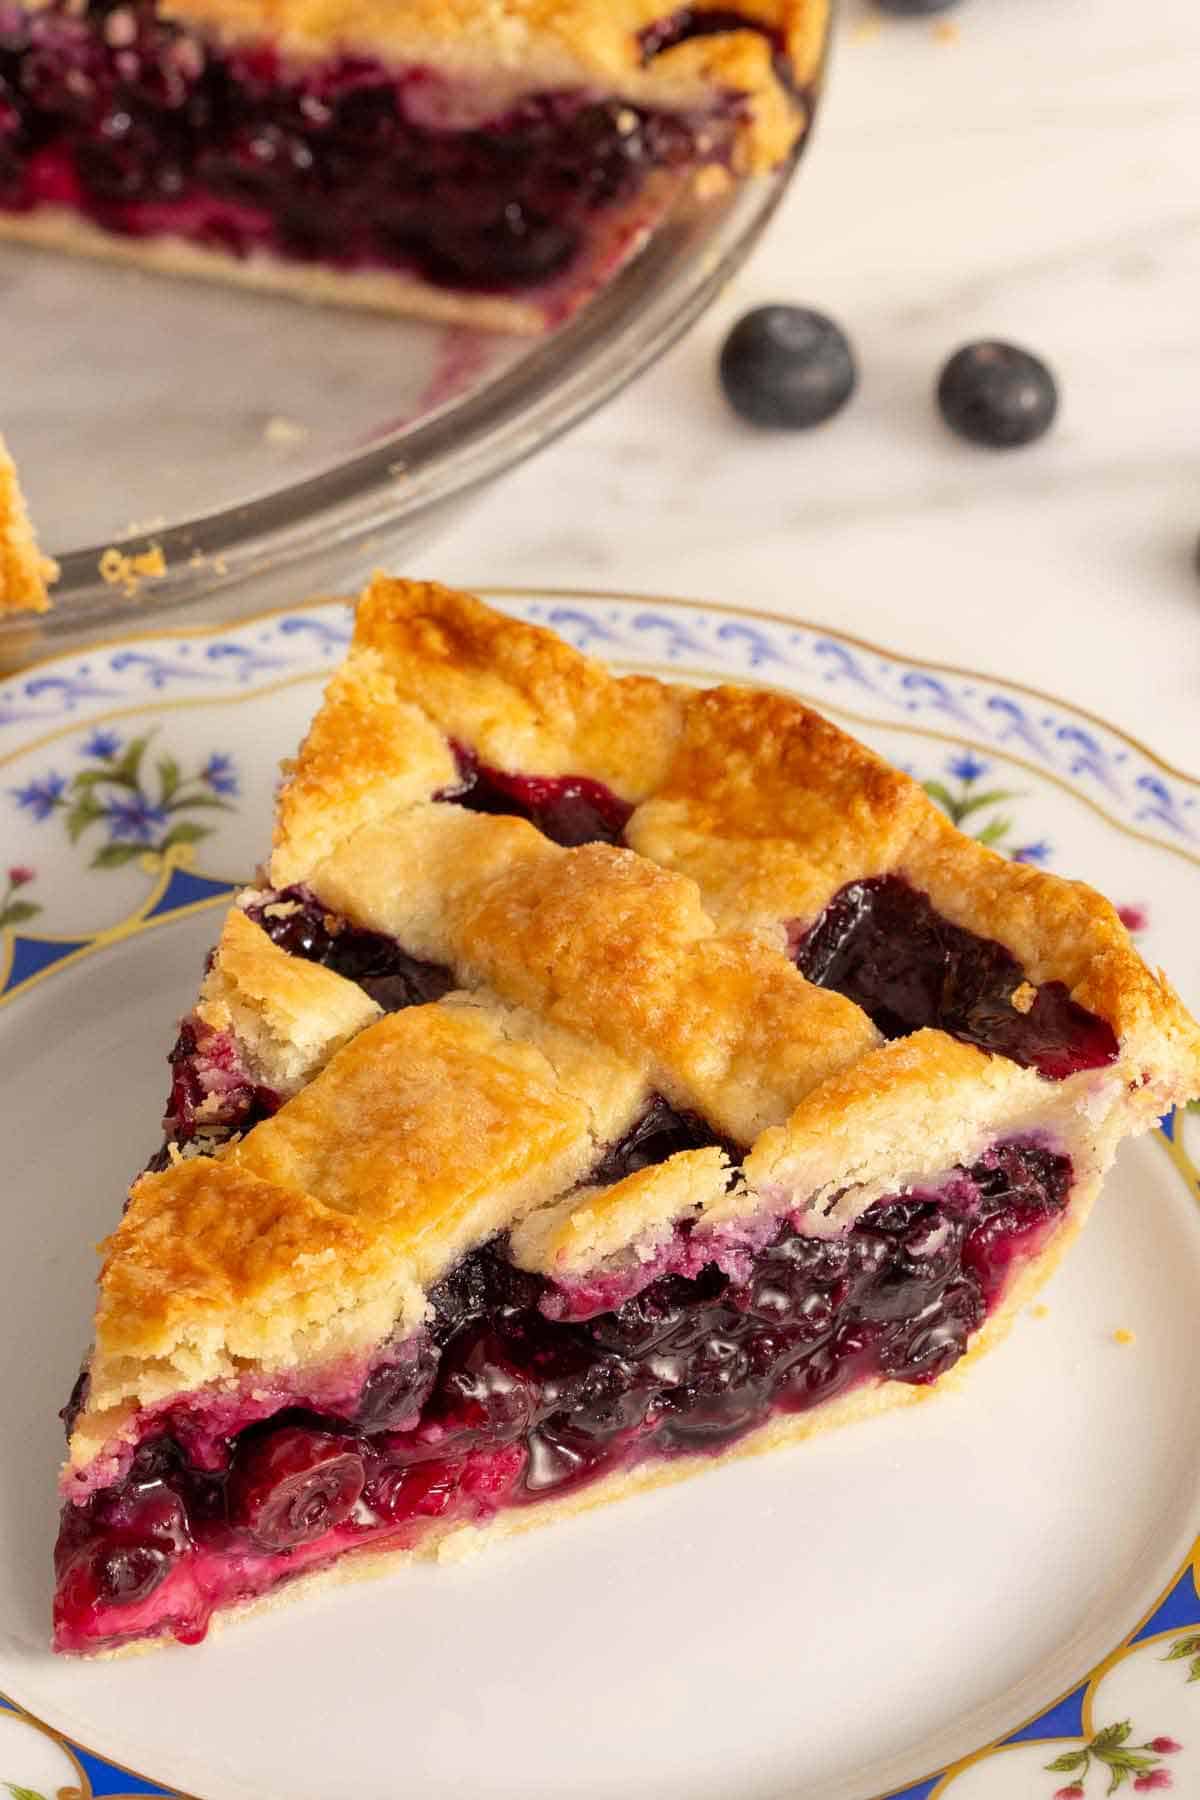 A close up view of a slice of blueberry pie on a plate.